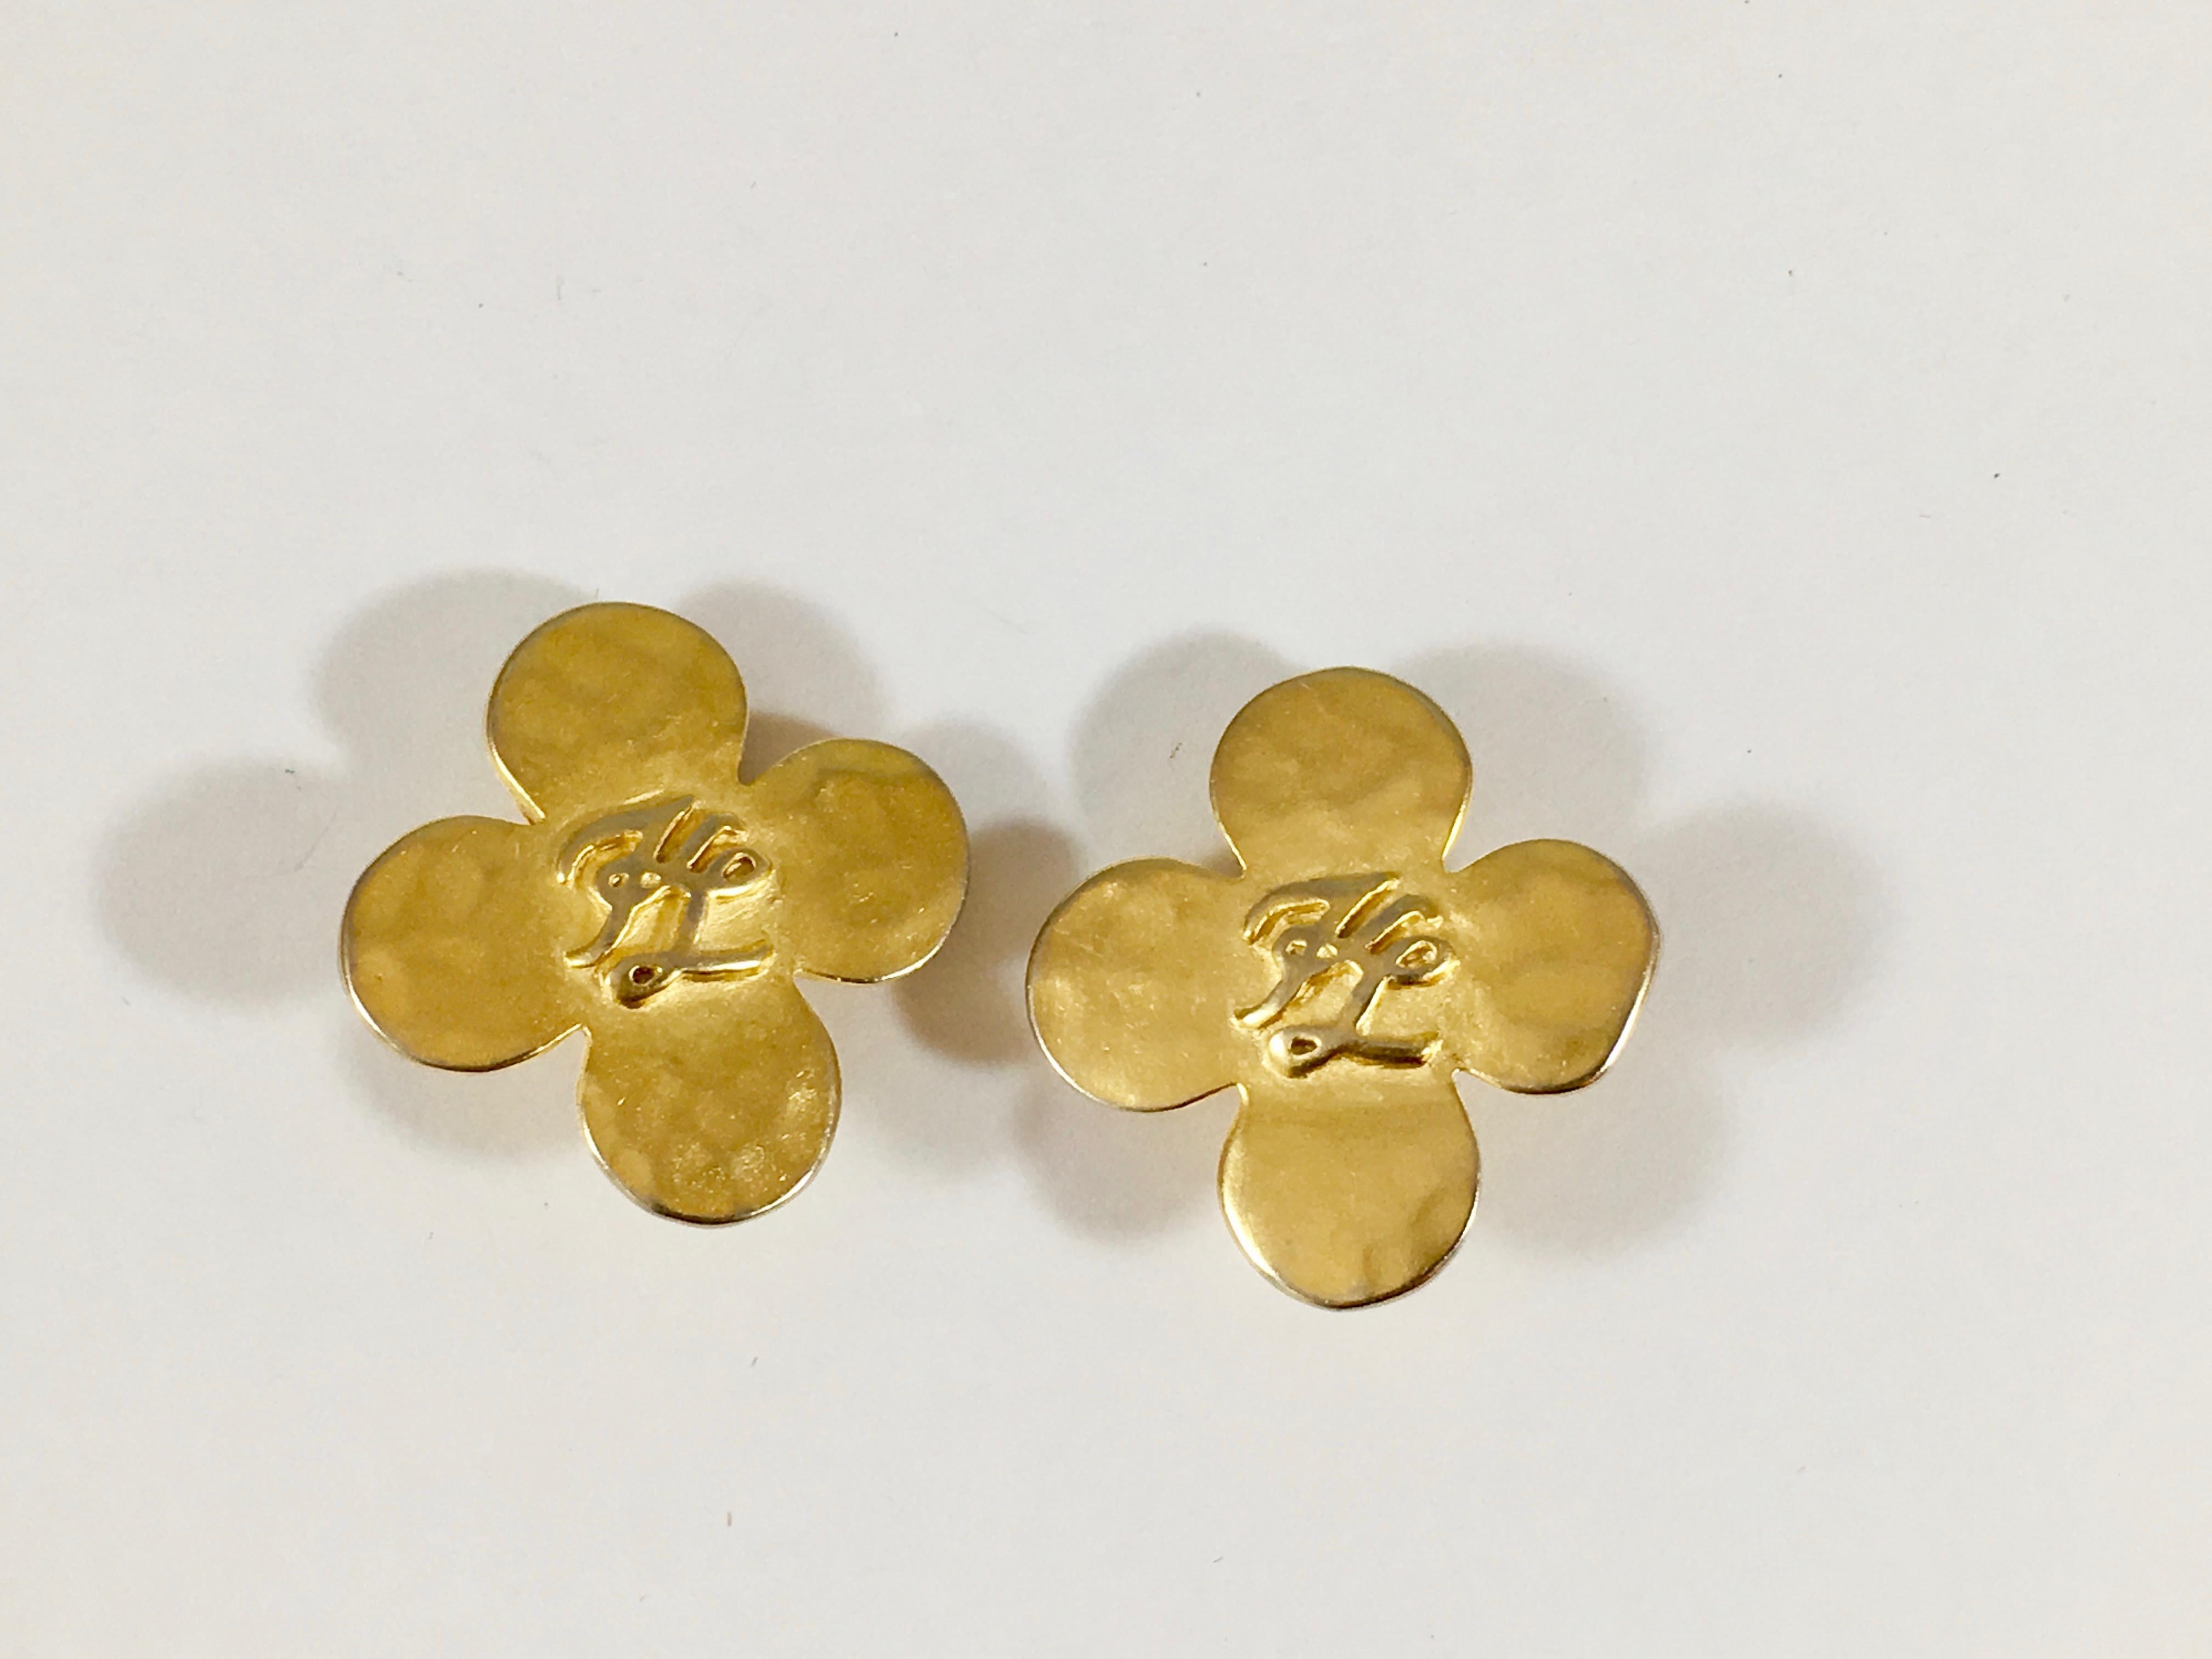 This is a goldtone pair of 1990s Karl Lagerfeld four leaf clover earrings marked in the center with a 'KL' for Karl Lagerfeld. They measure 1 1/16 inches x 1 1/16 inches. The back of each earring is marked with Karl Lagerfeld's signature fan and